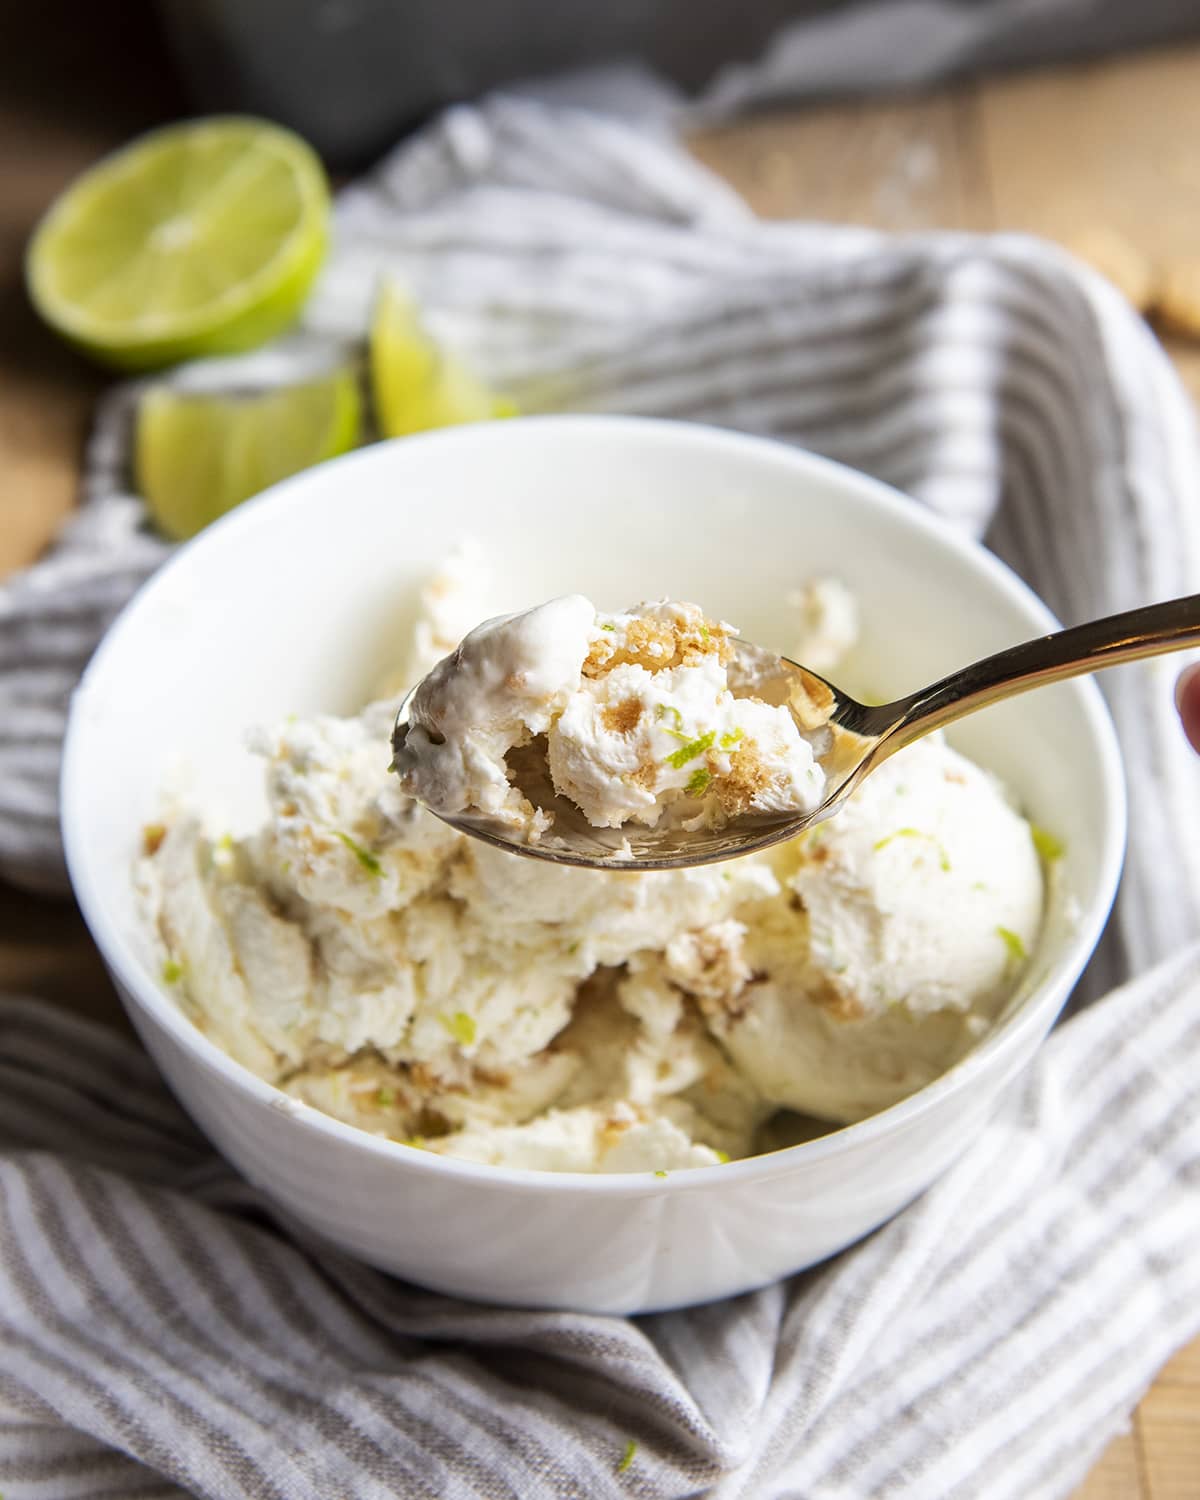 A spoonful of ice cream with graham cracker swirl above a bowl of key lime ice cream.